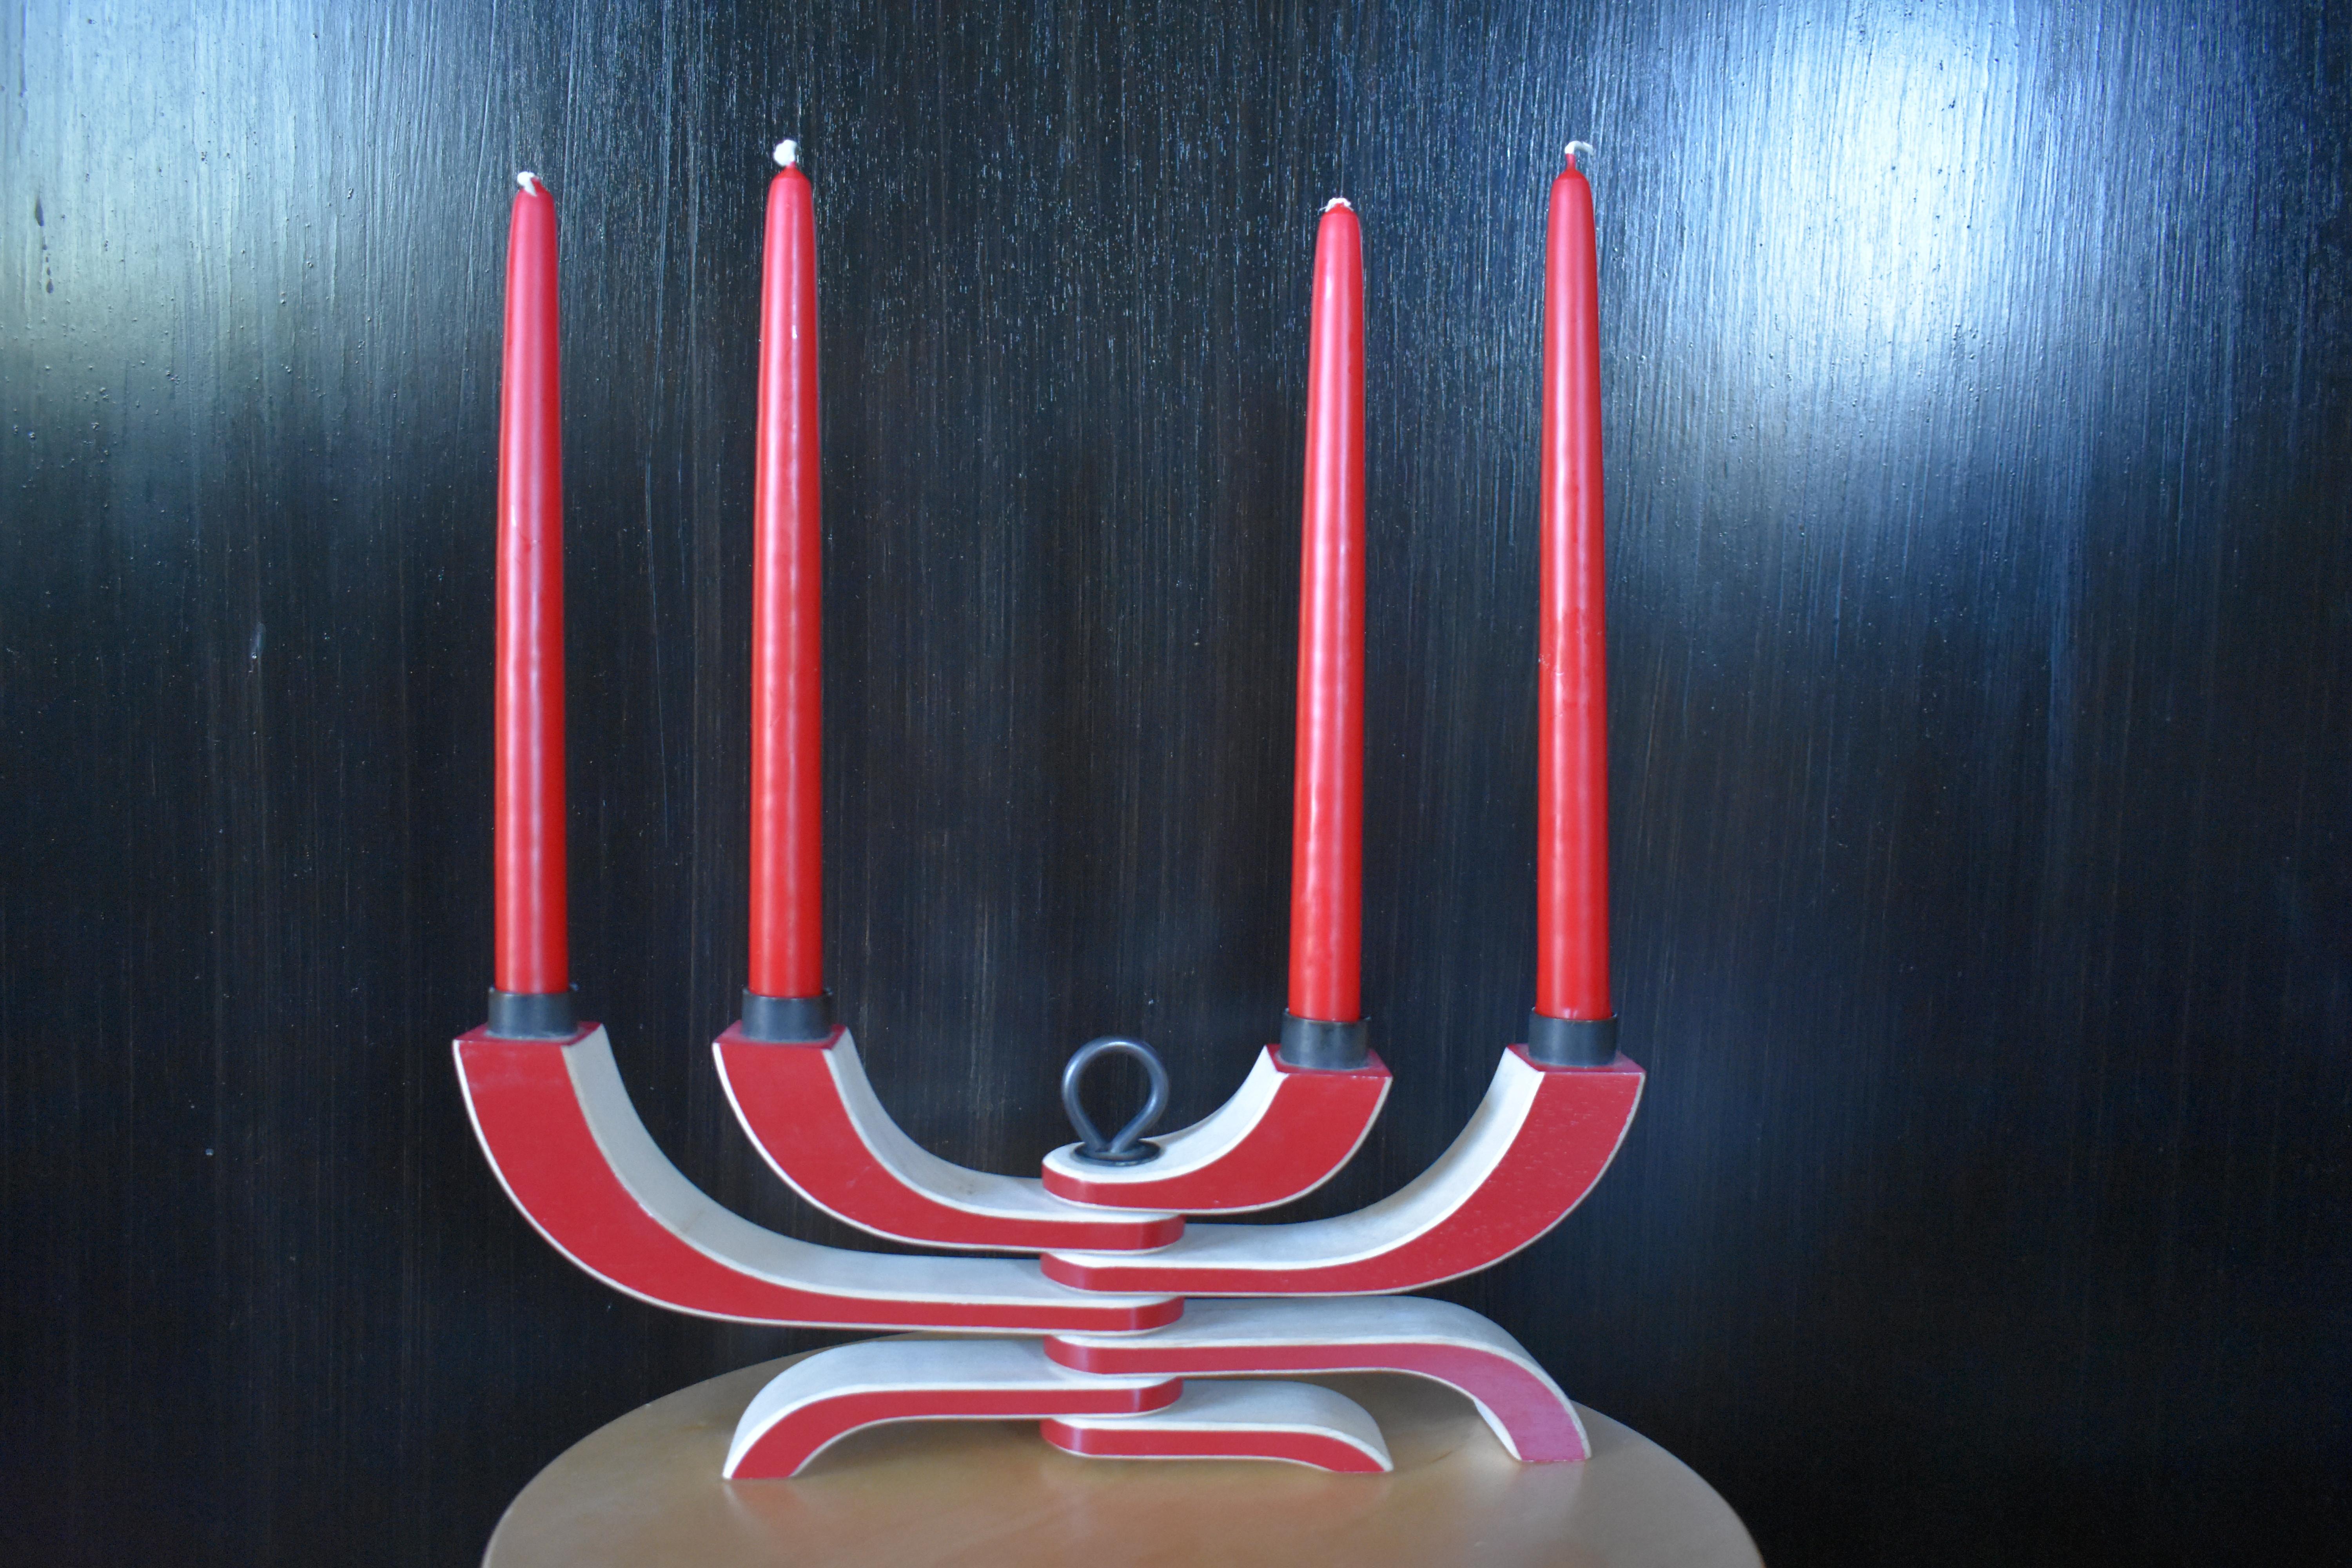 Beautiful four-arm Nordic light candle holder. Adjustable to change up the look for your table or fireplace mantle. Not just for Christmas.